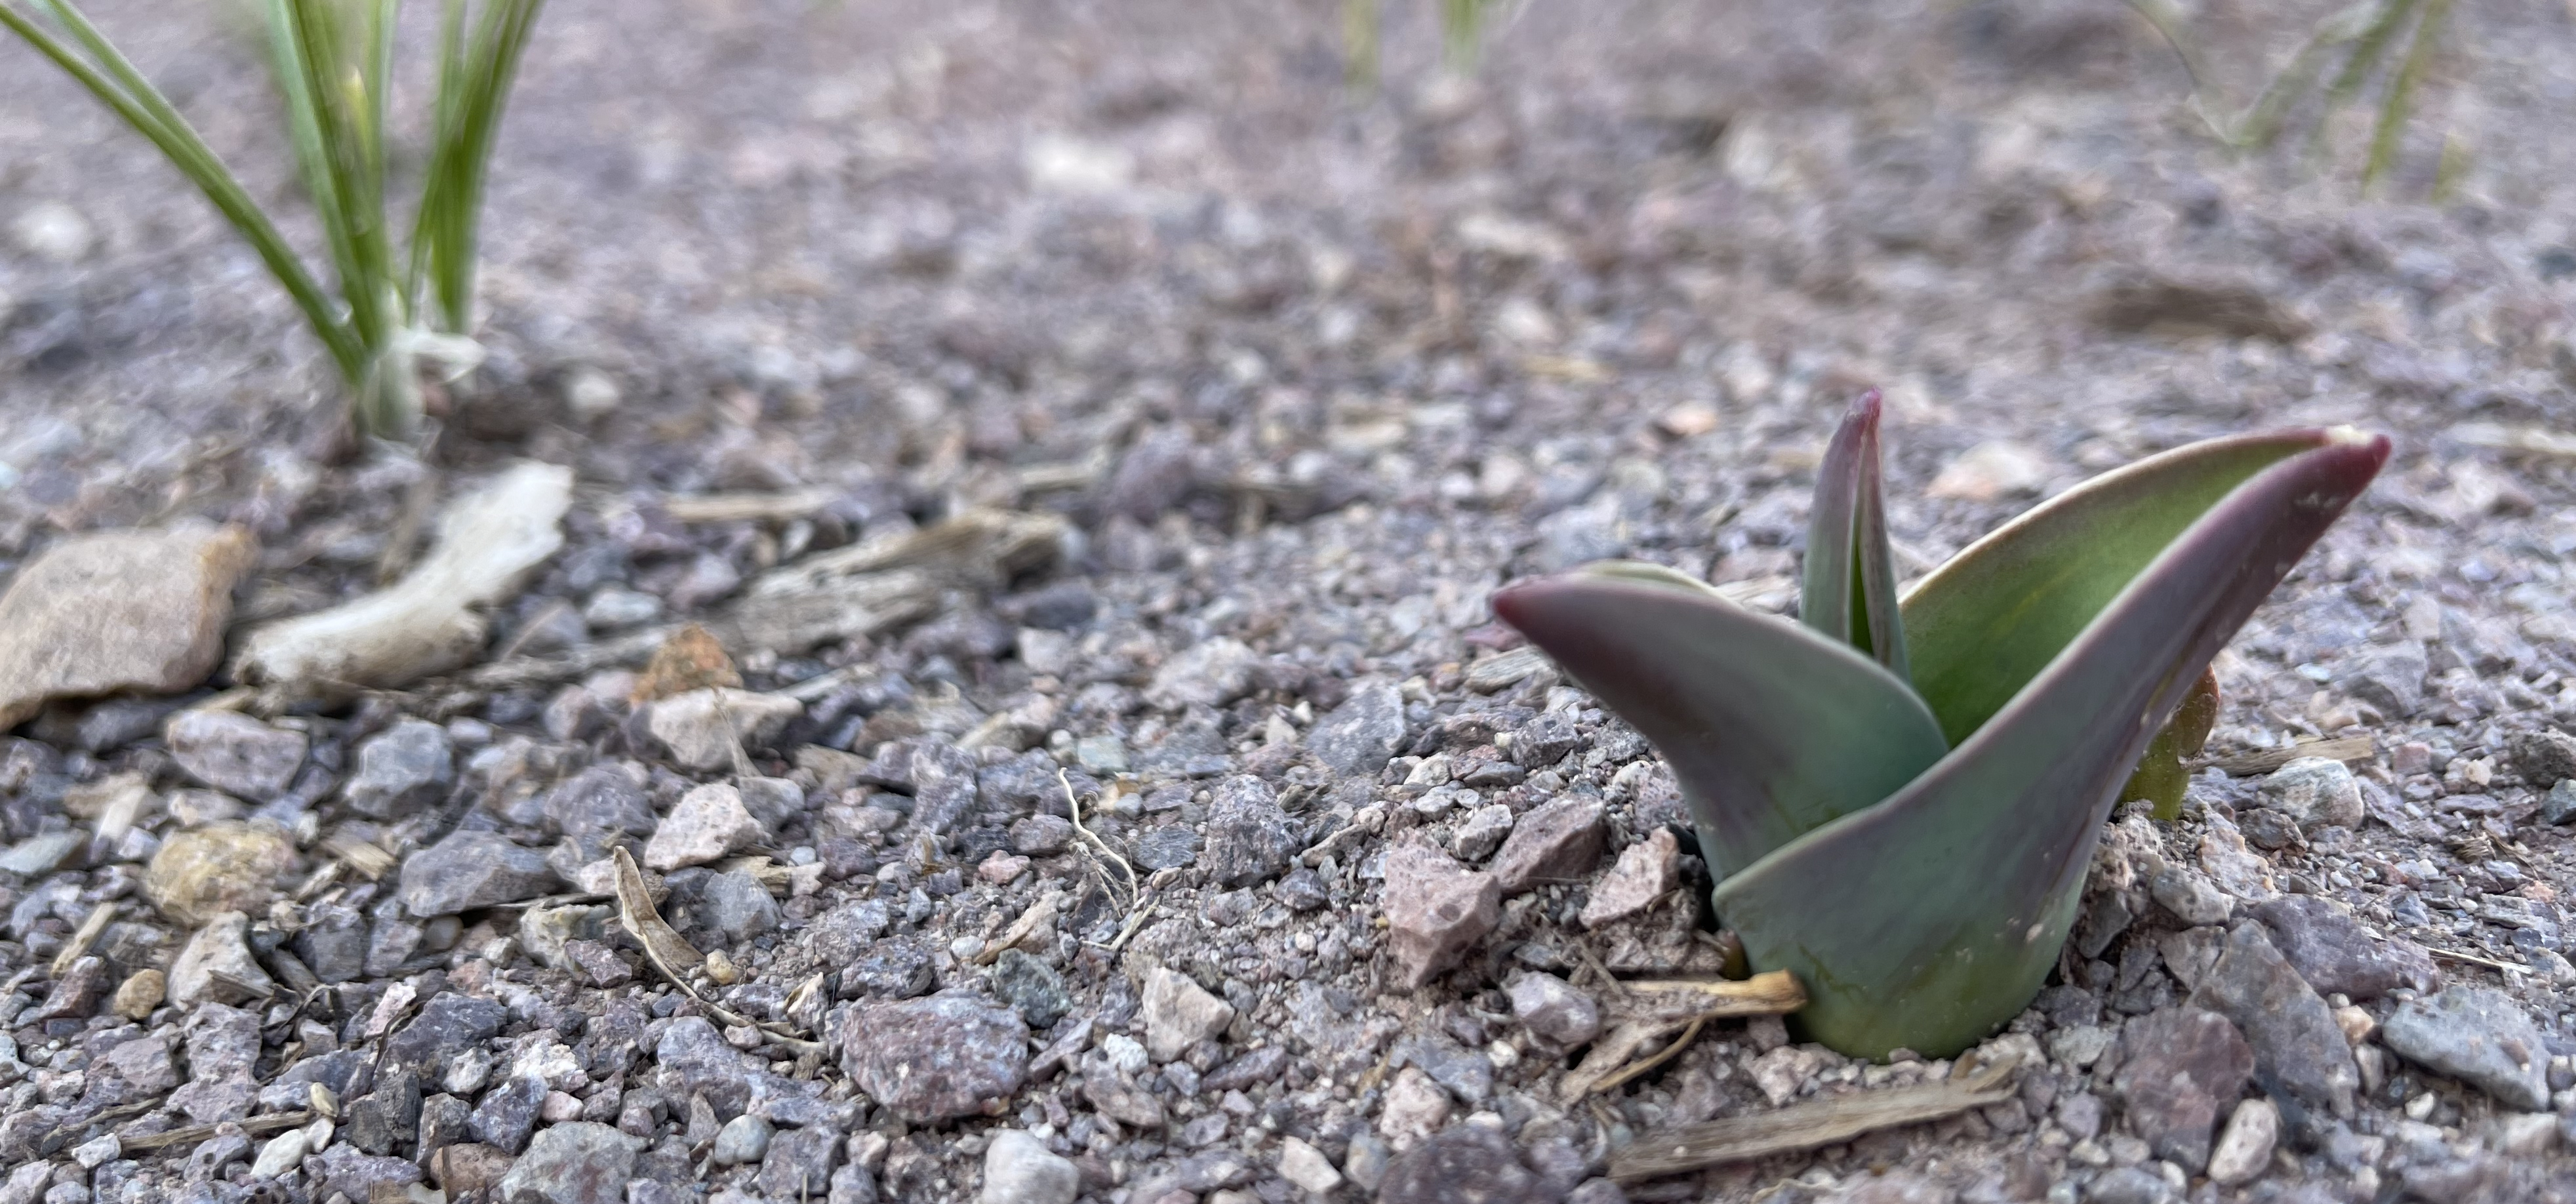 A tulip sprouting from the ground in the foreground, in front of a crocus.